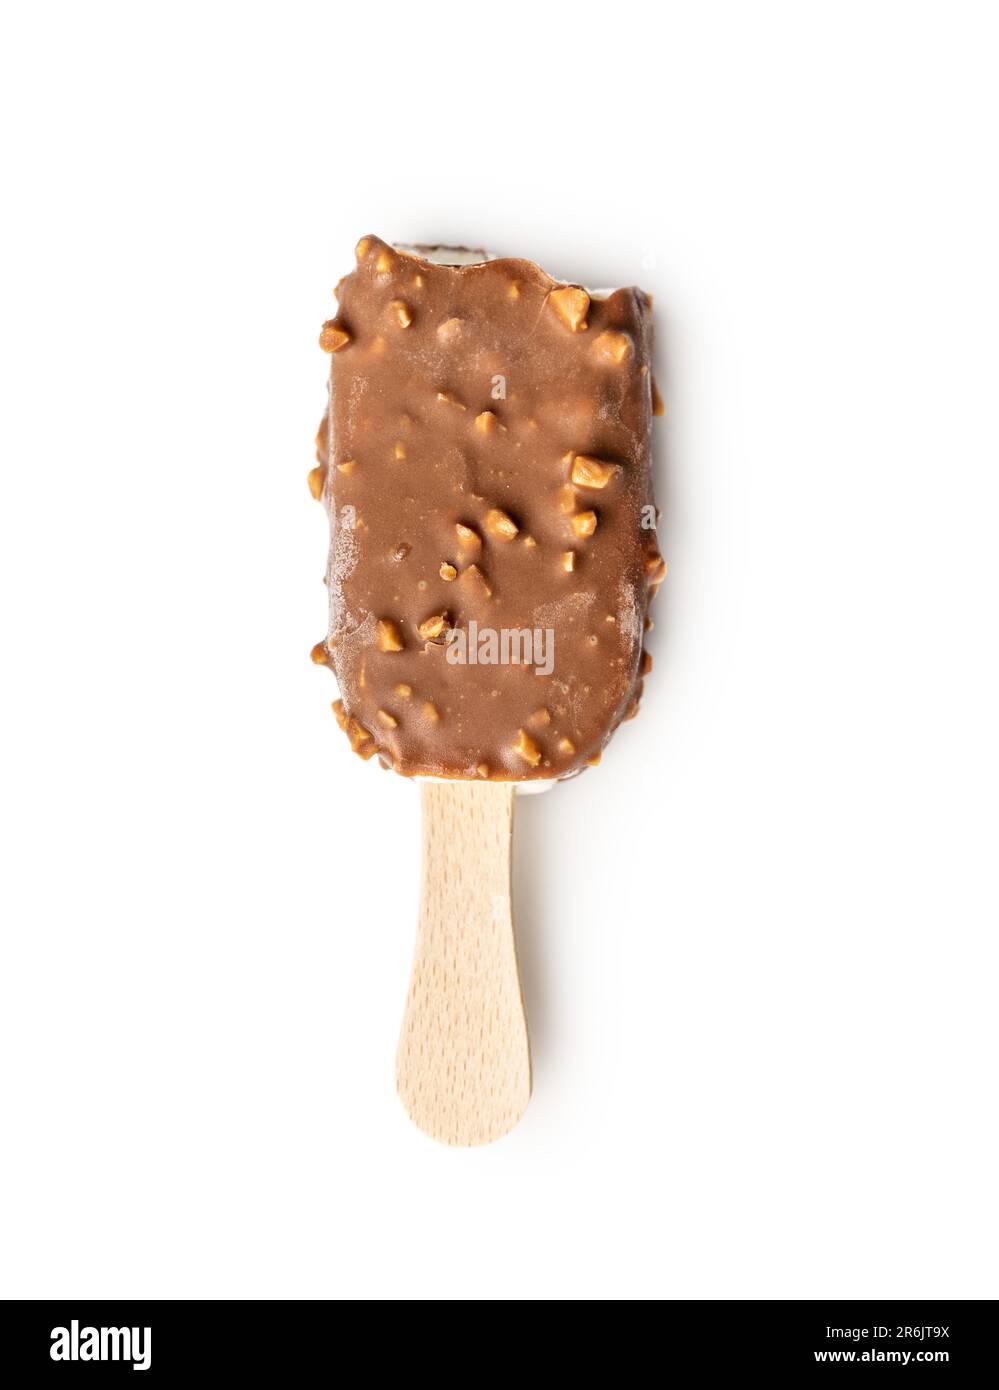 Popsicle, ice cream covered with chocolate isolated on the white background. Stock Photo